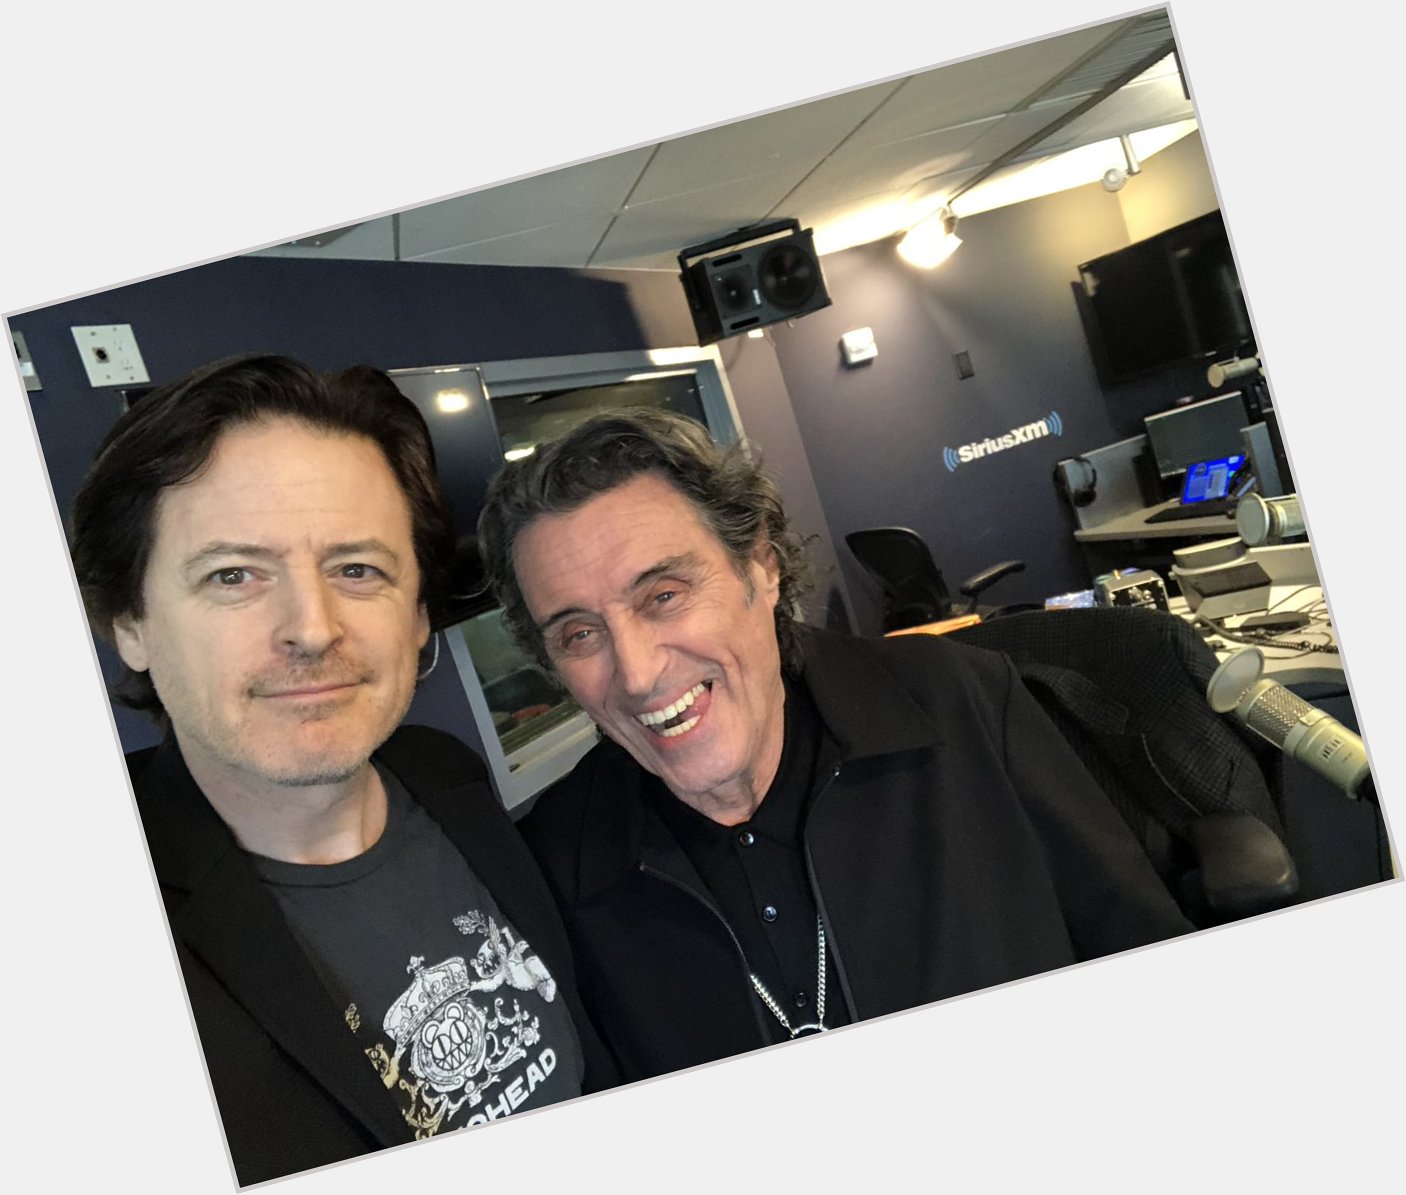 Happy 79th birthday to Ian McShane.
I made him laugh one time so I can die now. 